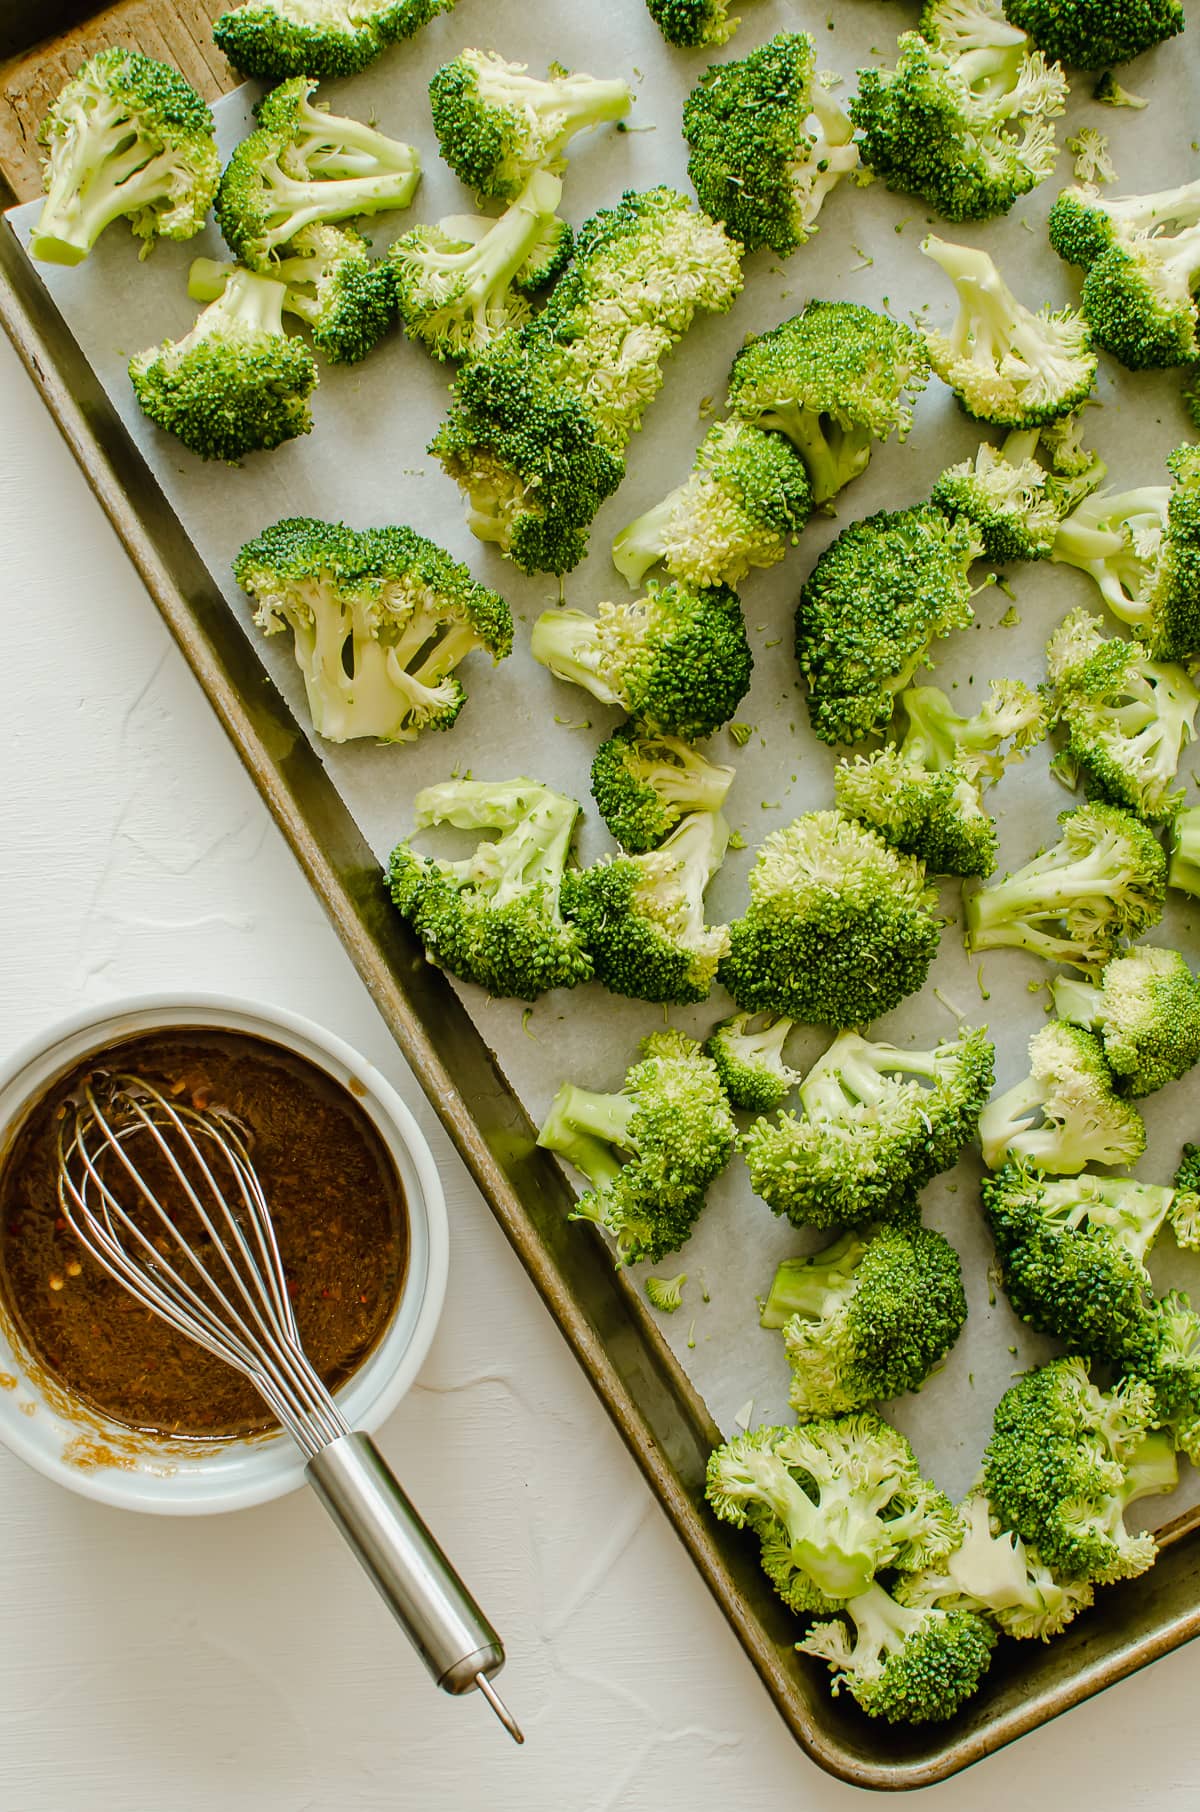 Raw broccoli florets on a sheet pan with a bowl of sesame sauce on the side.